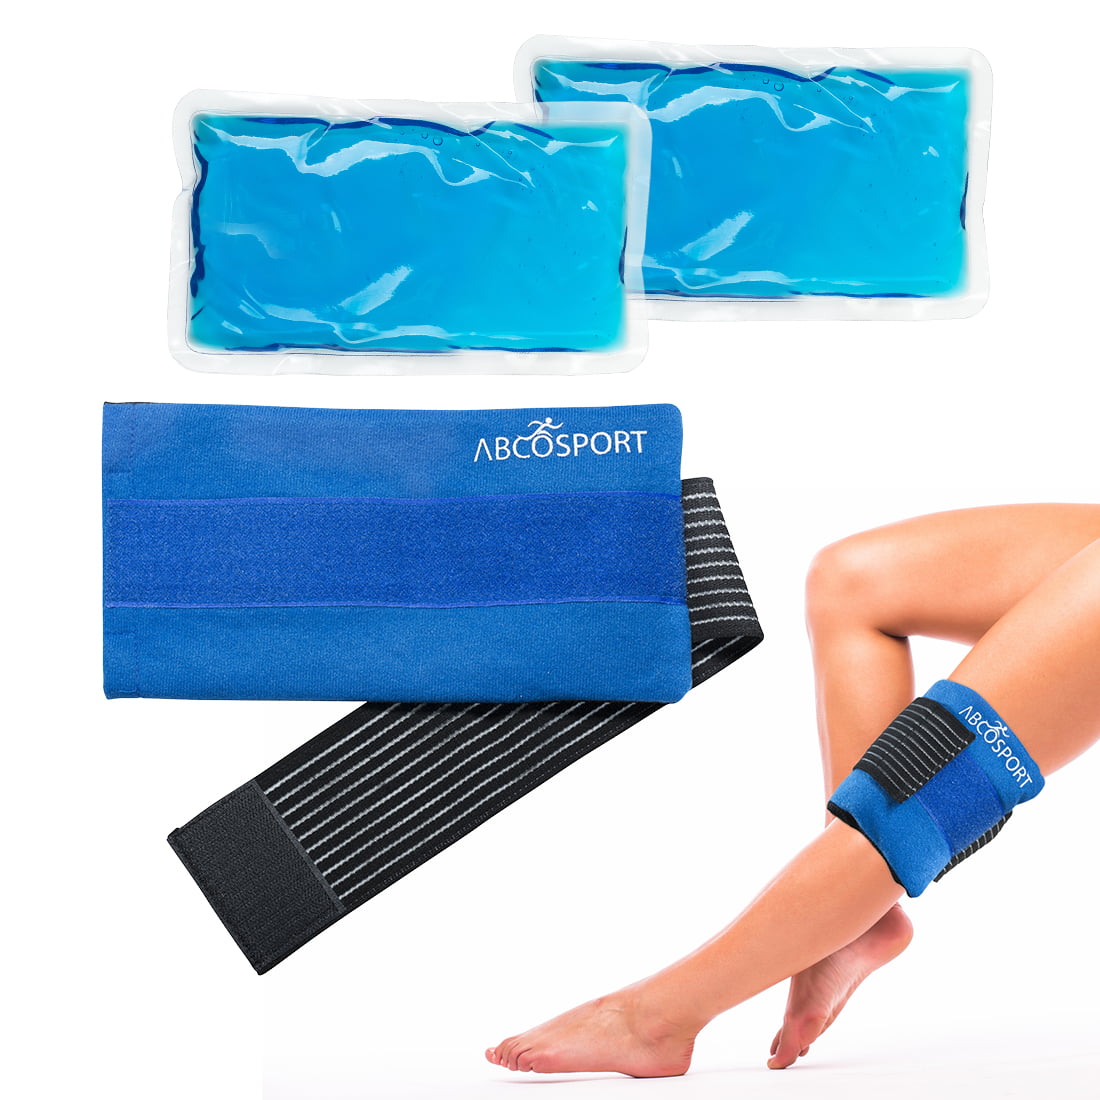 strap on ice pack for knee